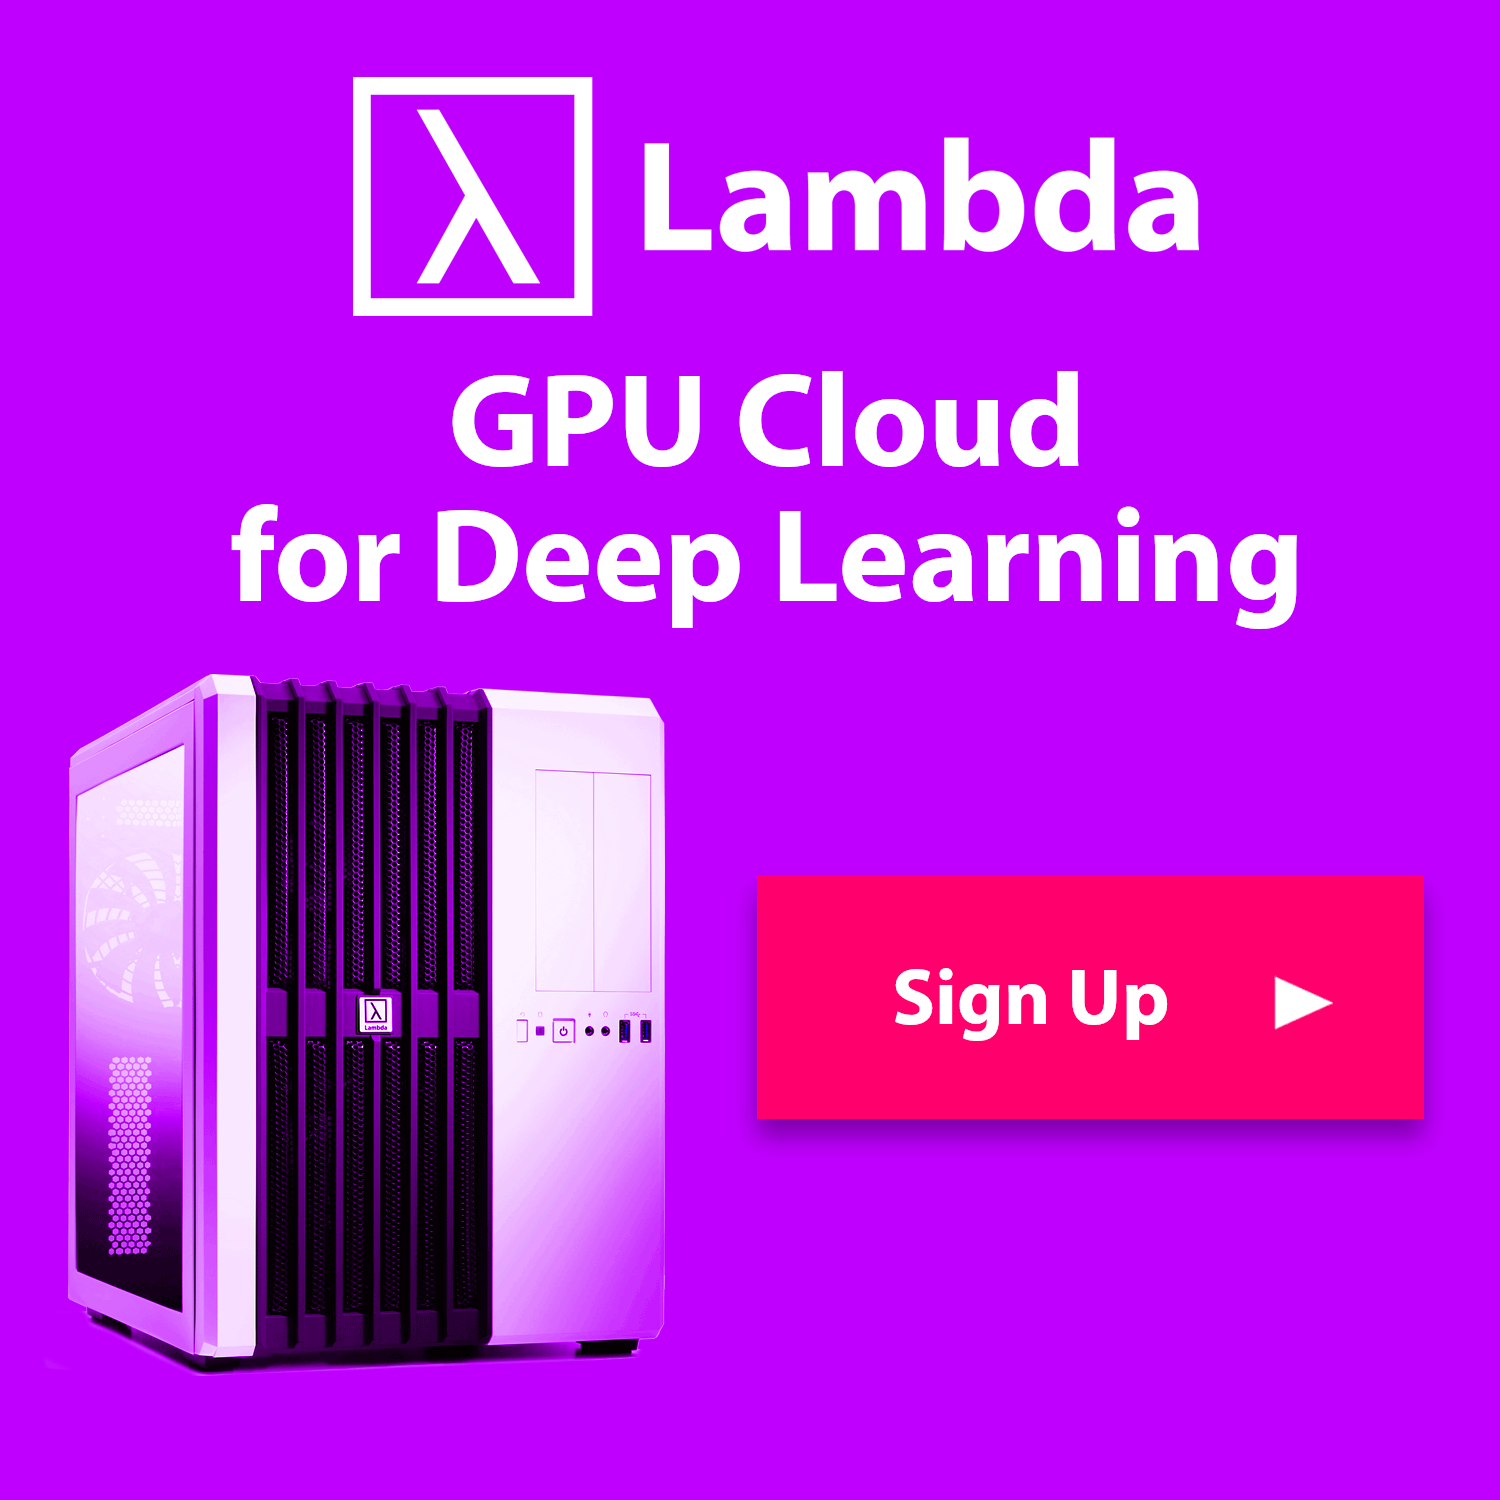 atlet Oh håndbevægelse Lambda on Twitter: "Want a GPU cloud that works out of the box with pytorch  for deep learning? That's what Lambda GPU Cloud is: https://t.co/SfrZlrAzSC  Sign up and you'll be training in